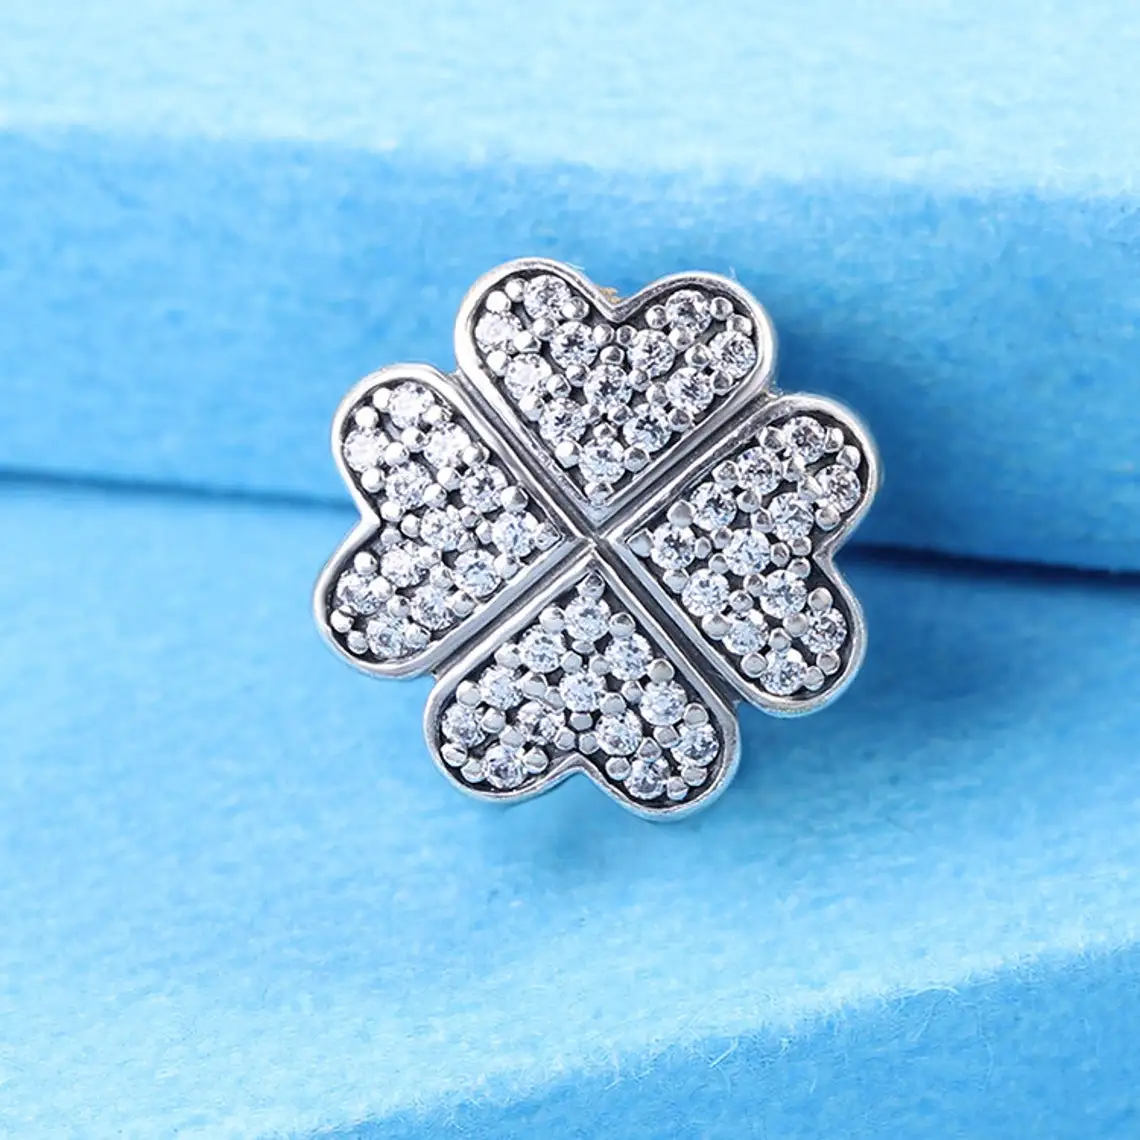 

925 Sterling Silver Petals of Love Clip Charm Bead with Clear Cz Fits All European Pandora Jewelry Bracelets Necklaces